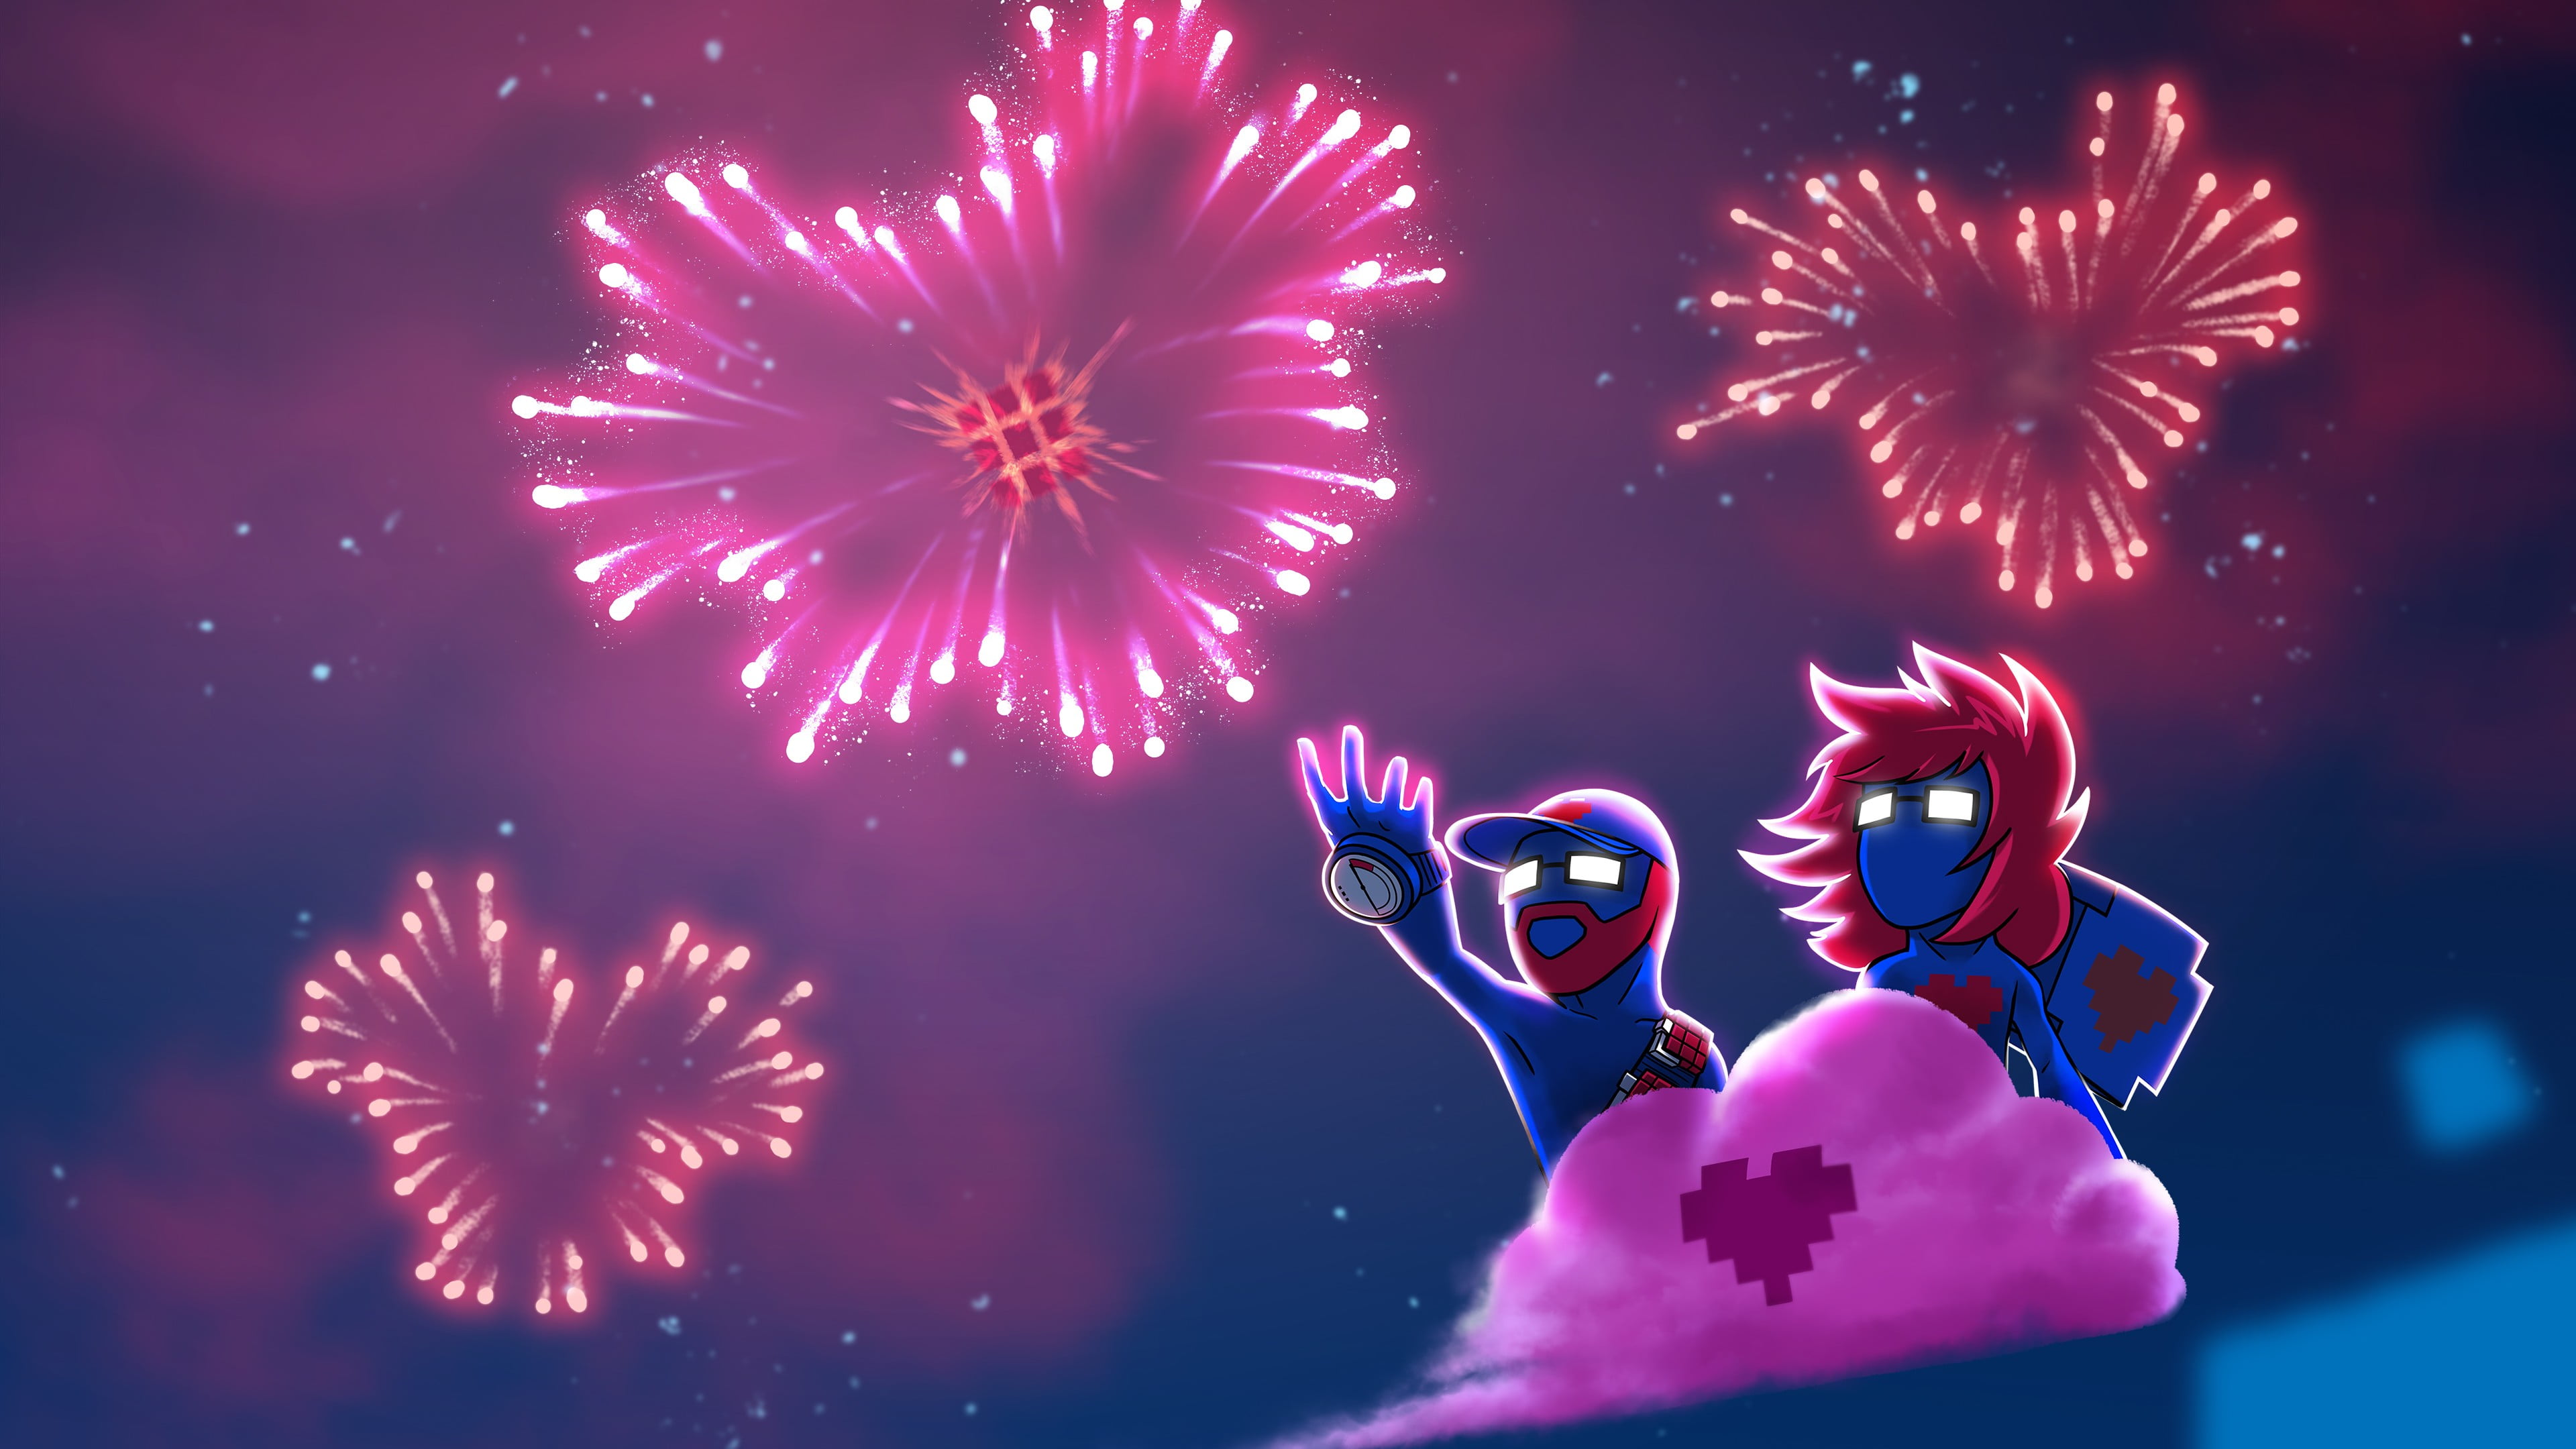 male and female riding on pink cloud digital wallpaper, Monstercat, Pegboard Nerds, fireworks, clouds